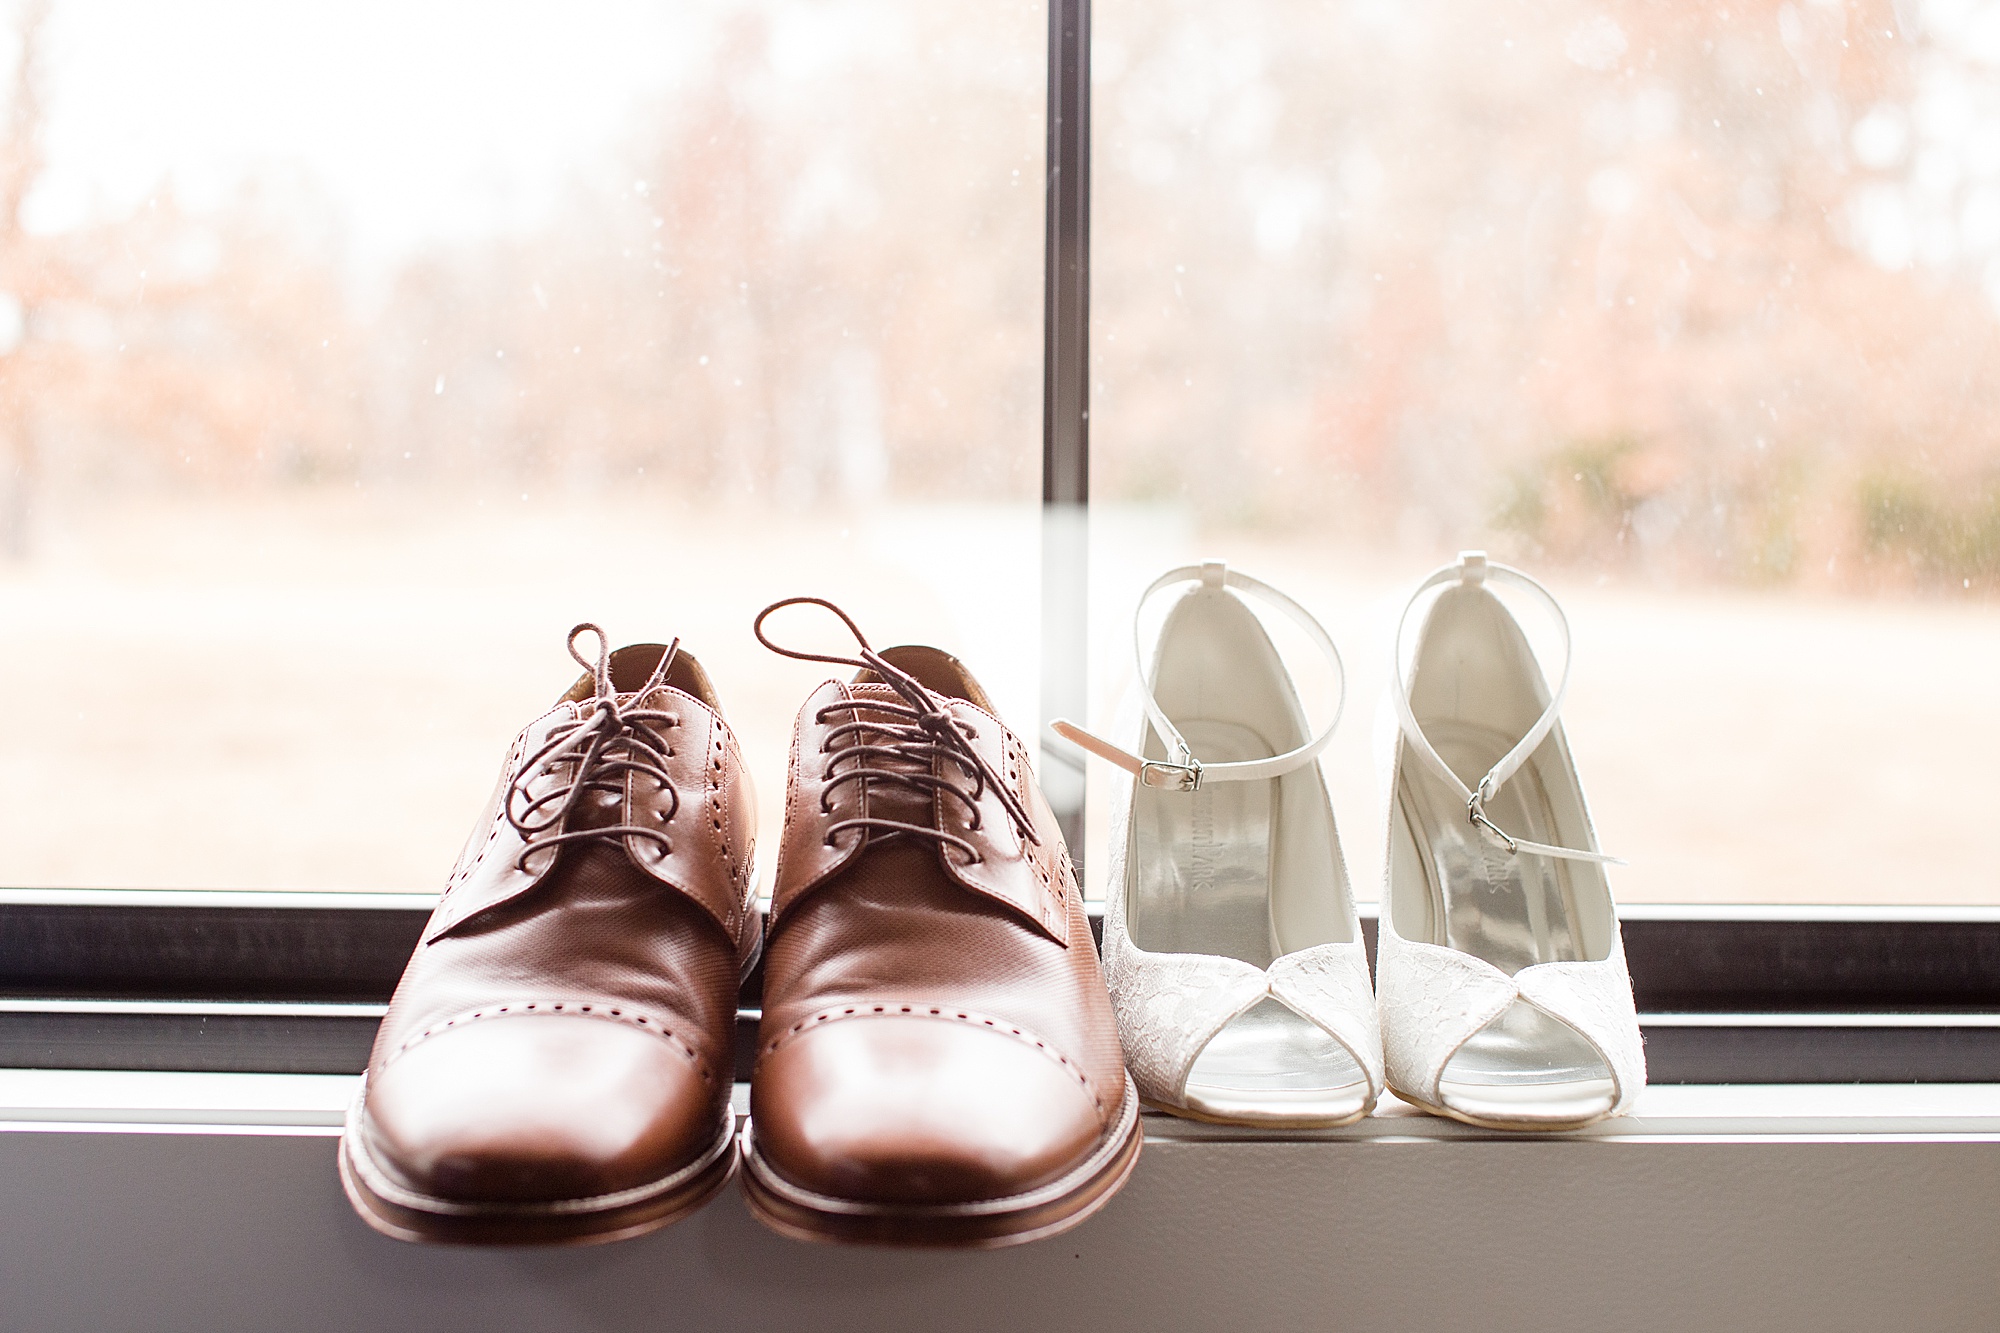 bride and groom shoes sit on window sill